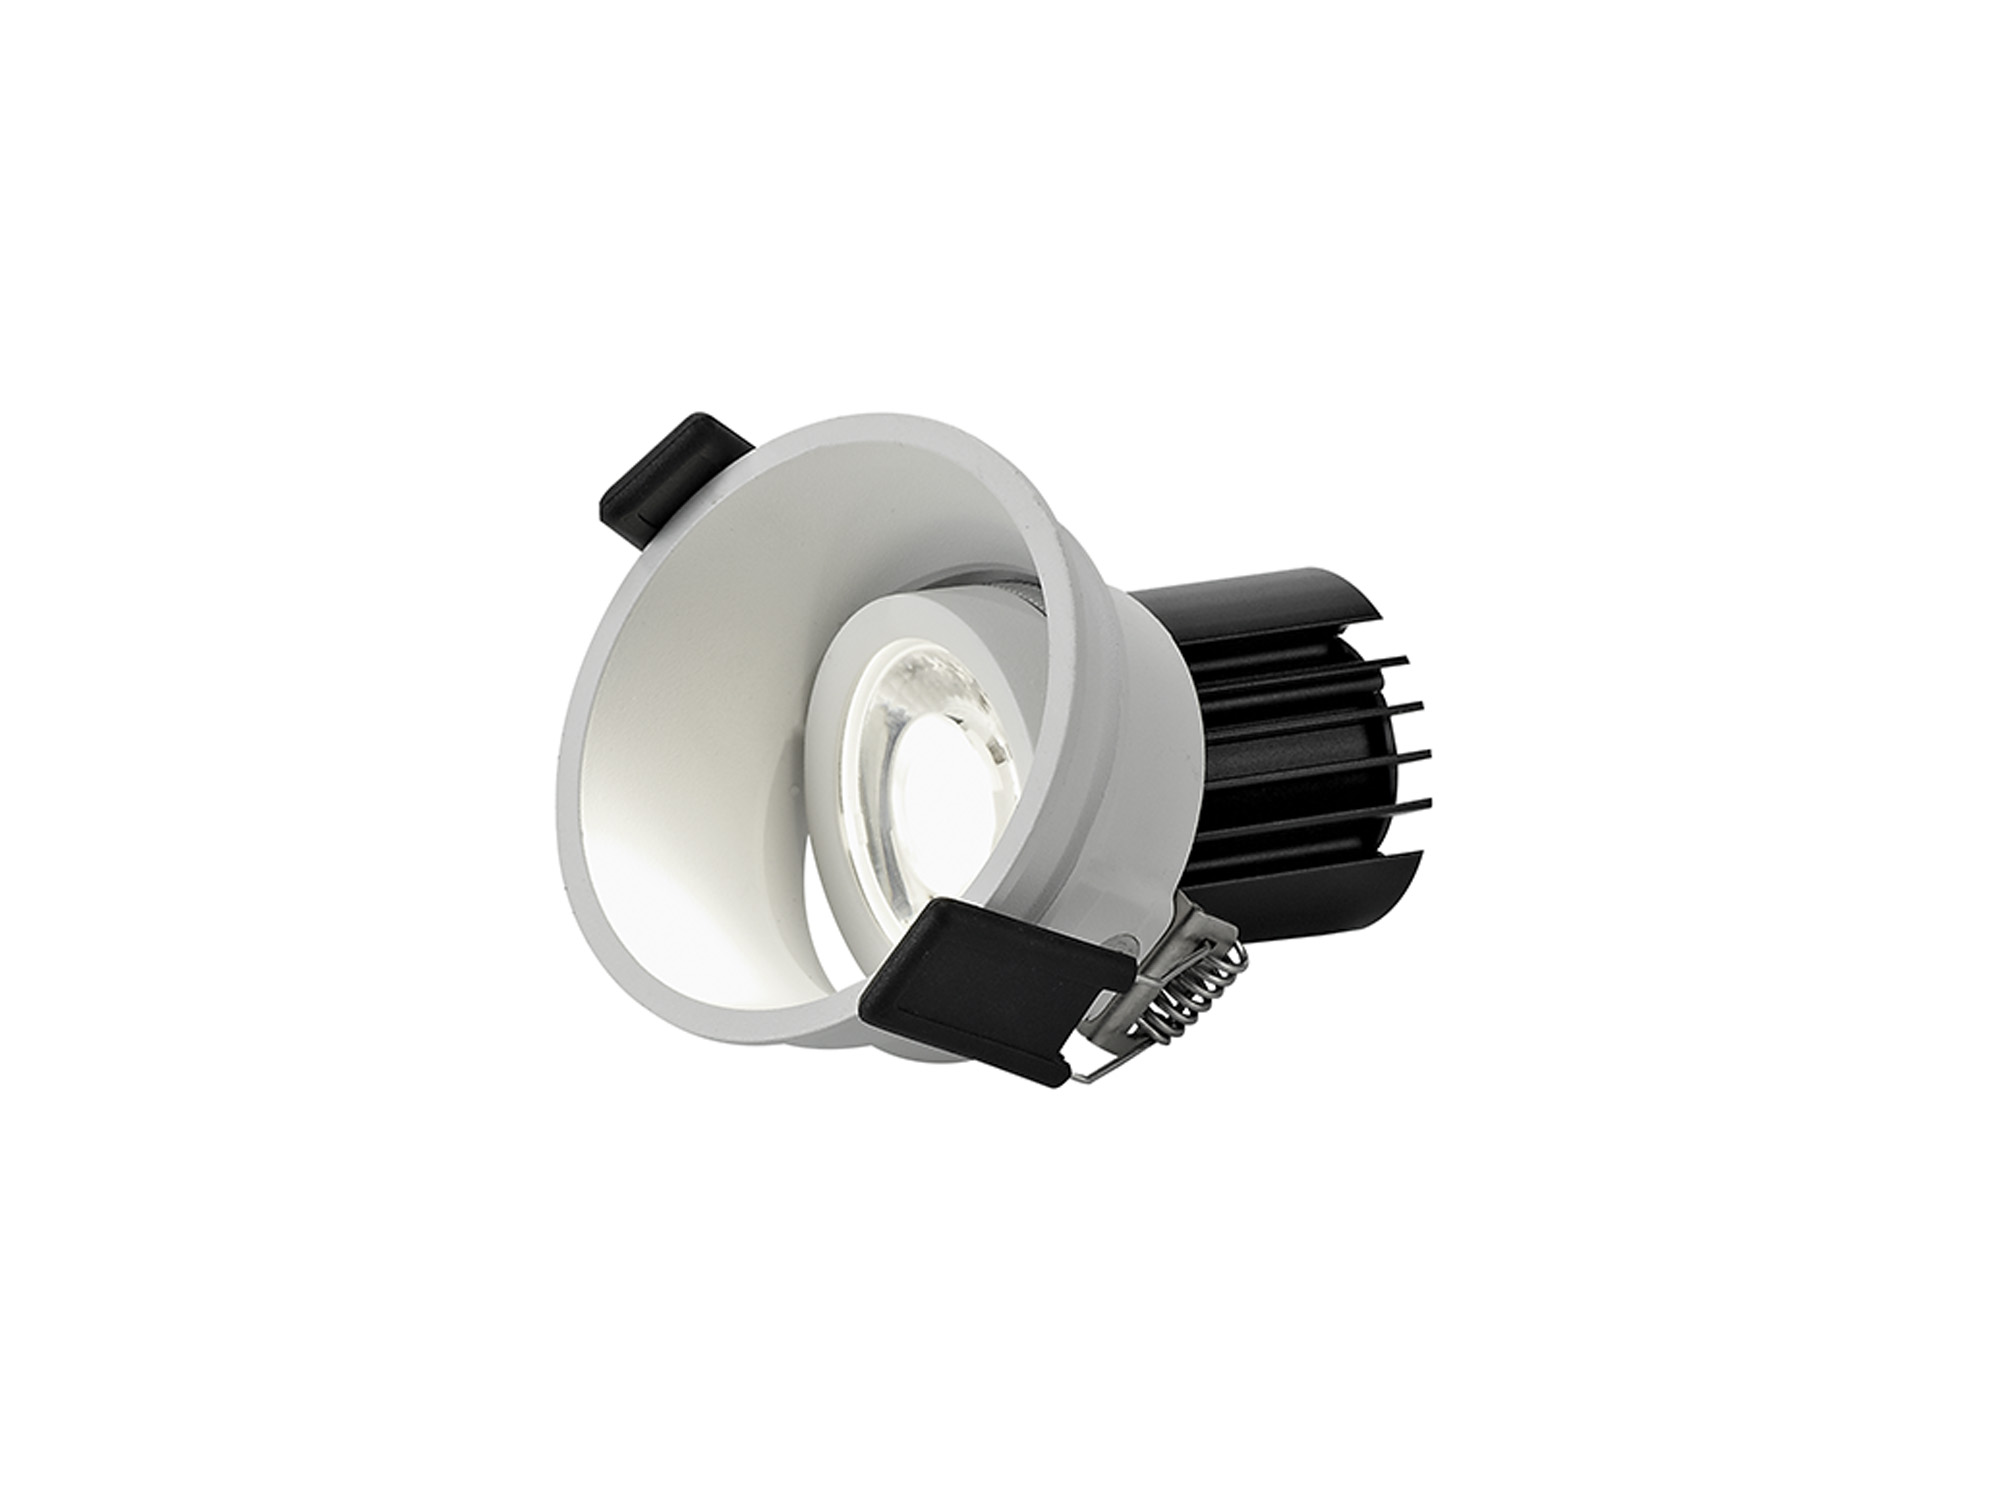 DM201658  Bania A 9 Powered by Tridonic  9W 2700K 770lm 24° CRI>90 LED Engine, 250mA White Adjustable Recessed Spotlight, IP20